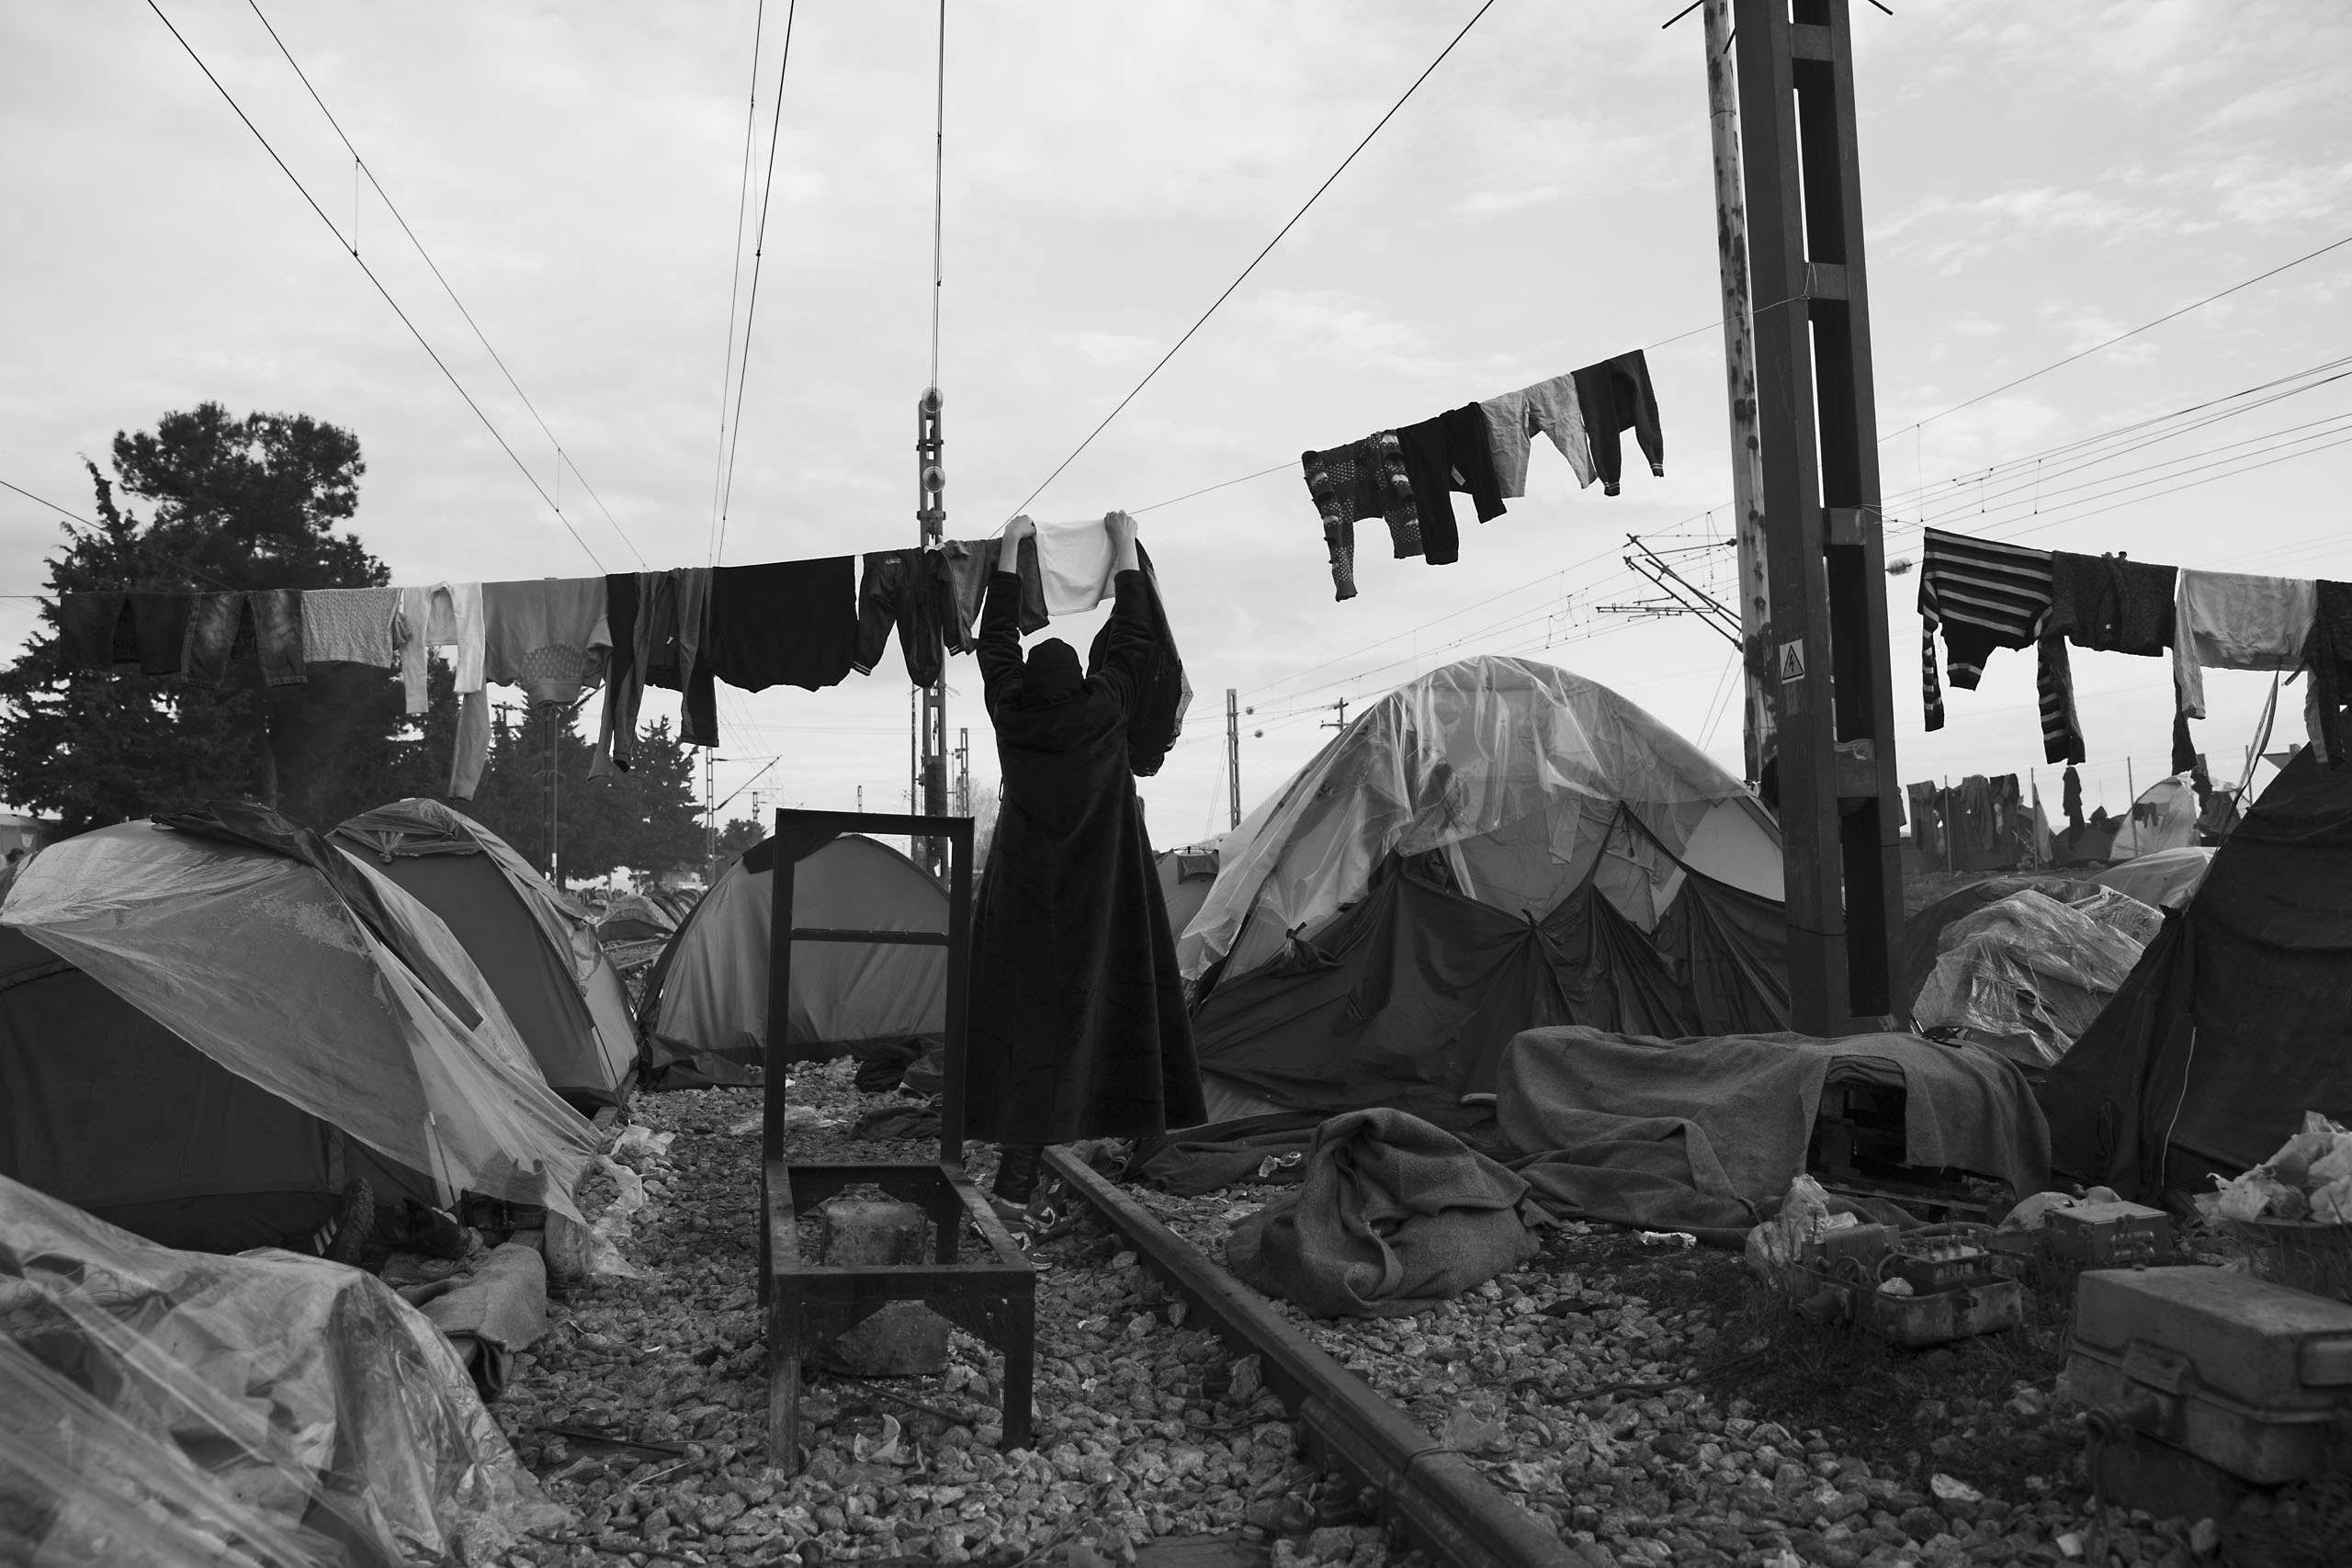 A woman hangs laundry at a camp where thousands of refugees are stranded near the village of Idomeni,  Greece at the border with Macedonia, March 12, 2016.